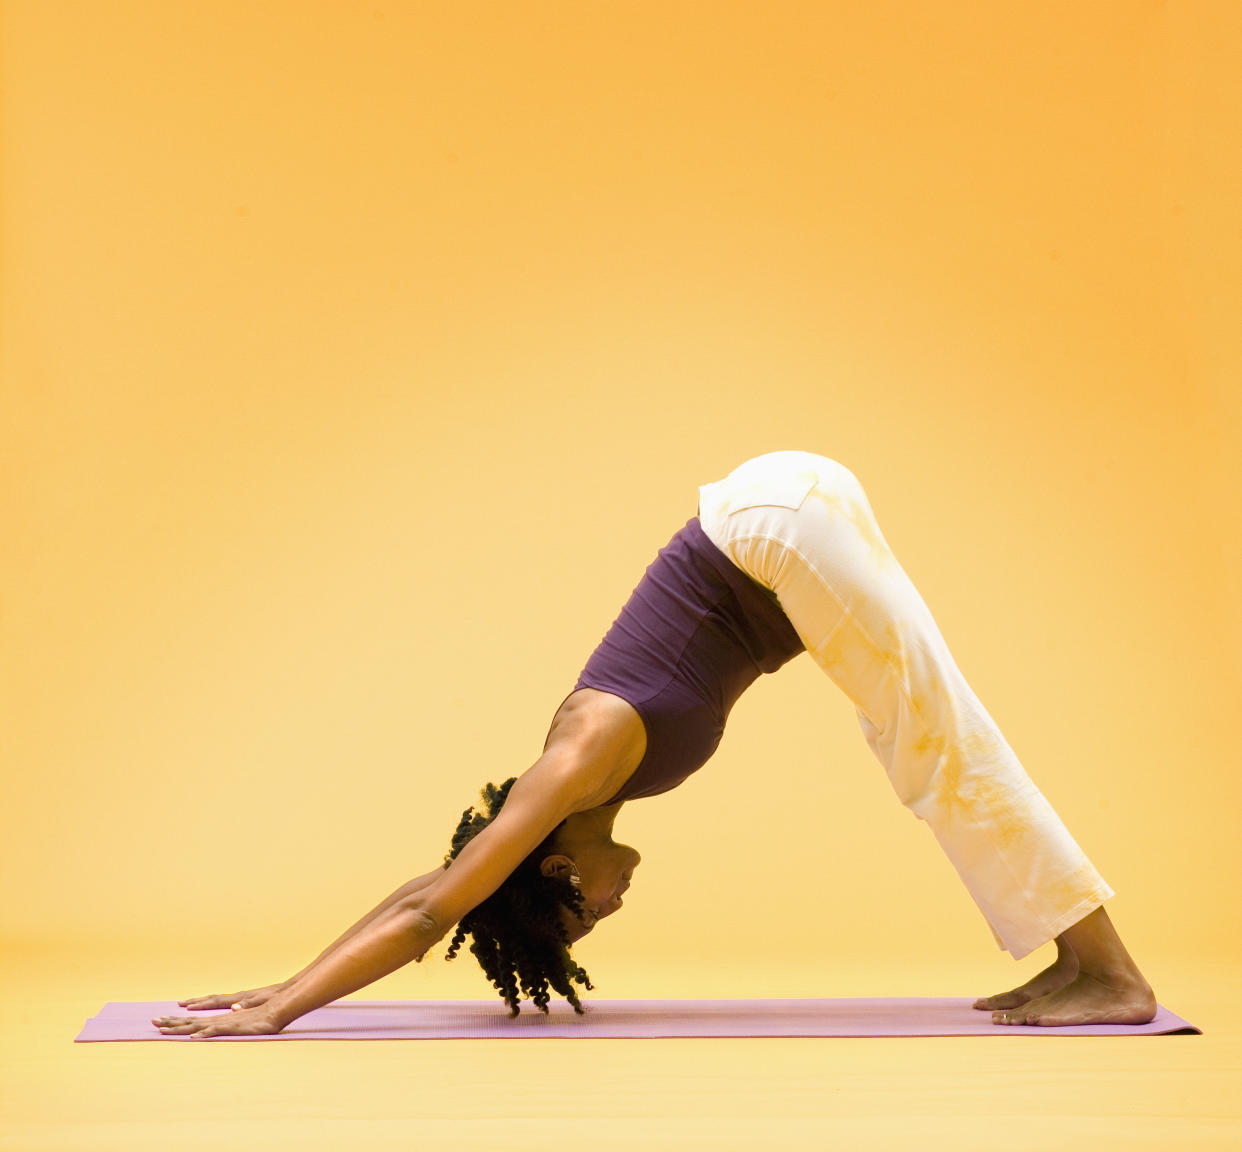 If you only do one yoga pose after a long day at work, make it a downward-facing dog, a holistic pose that stretches and strengthens many parts of the body. To come into the pose, move into an inverted "V' shape. With hands outstretched in front and you, lift the hips and ground the feet (at about hips-width apart) into the floor. Ground all the fingers into the floor and point them forward, bring your attention to the breath as you enjoy the stretch for 30-60 seconds.  "It helps you lengthen and strengthen muscles in the body," says Vidya Bielkus, certified yoga teacher and co-founder of Health Yoga Life. "It reduces tension in the shoulders, relaxes the neck, and lets a little more blood flow get to the brain. You're also able to really stretch the legs, so if you're sitting all day, the legs are getting inactive."  The pose is also great for stretching out the wrists and hands, which may become sore or tired from hours of typing.